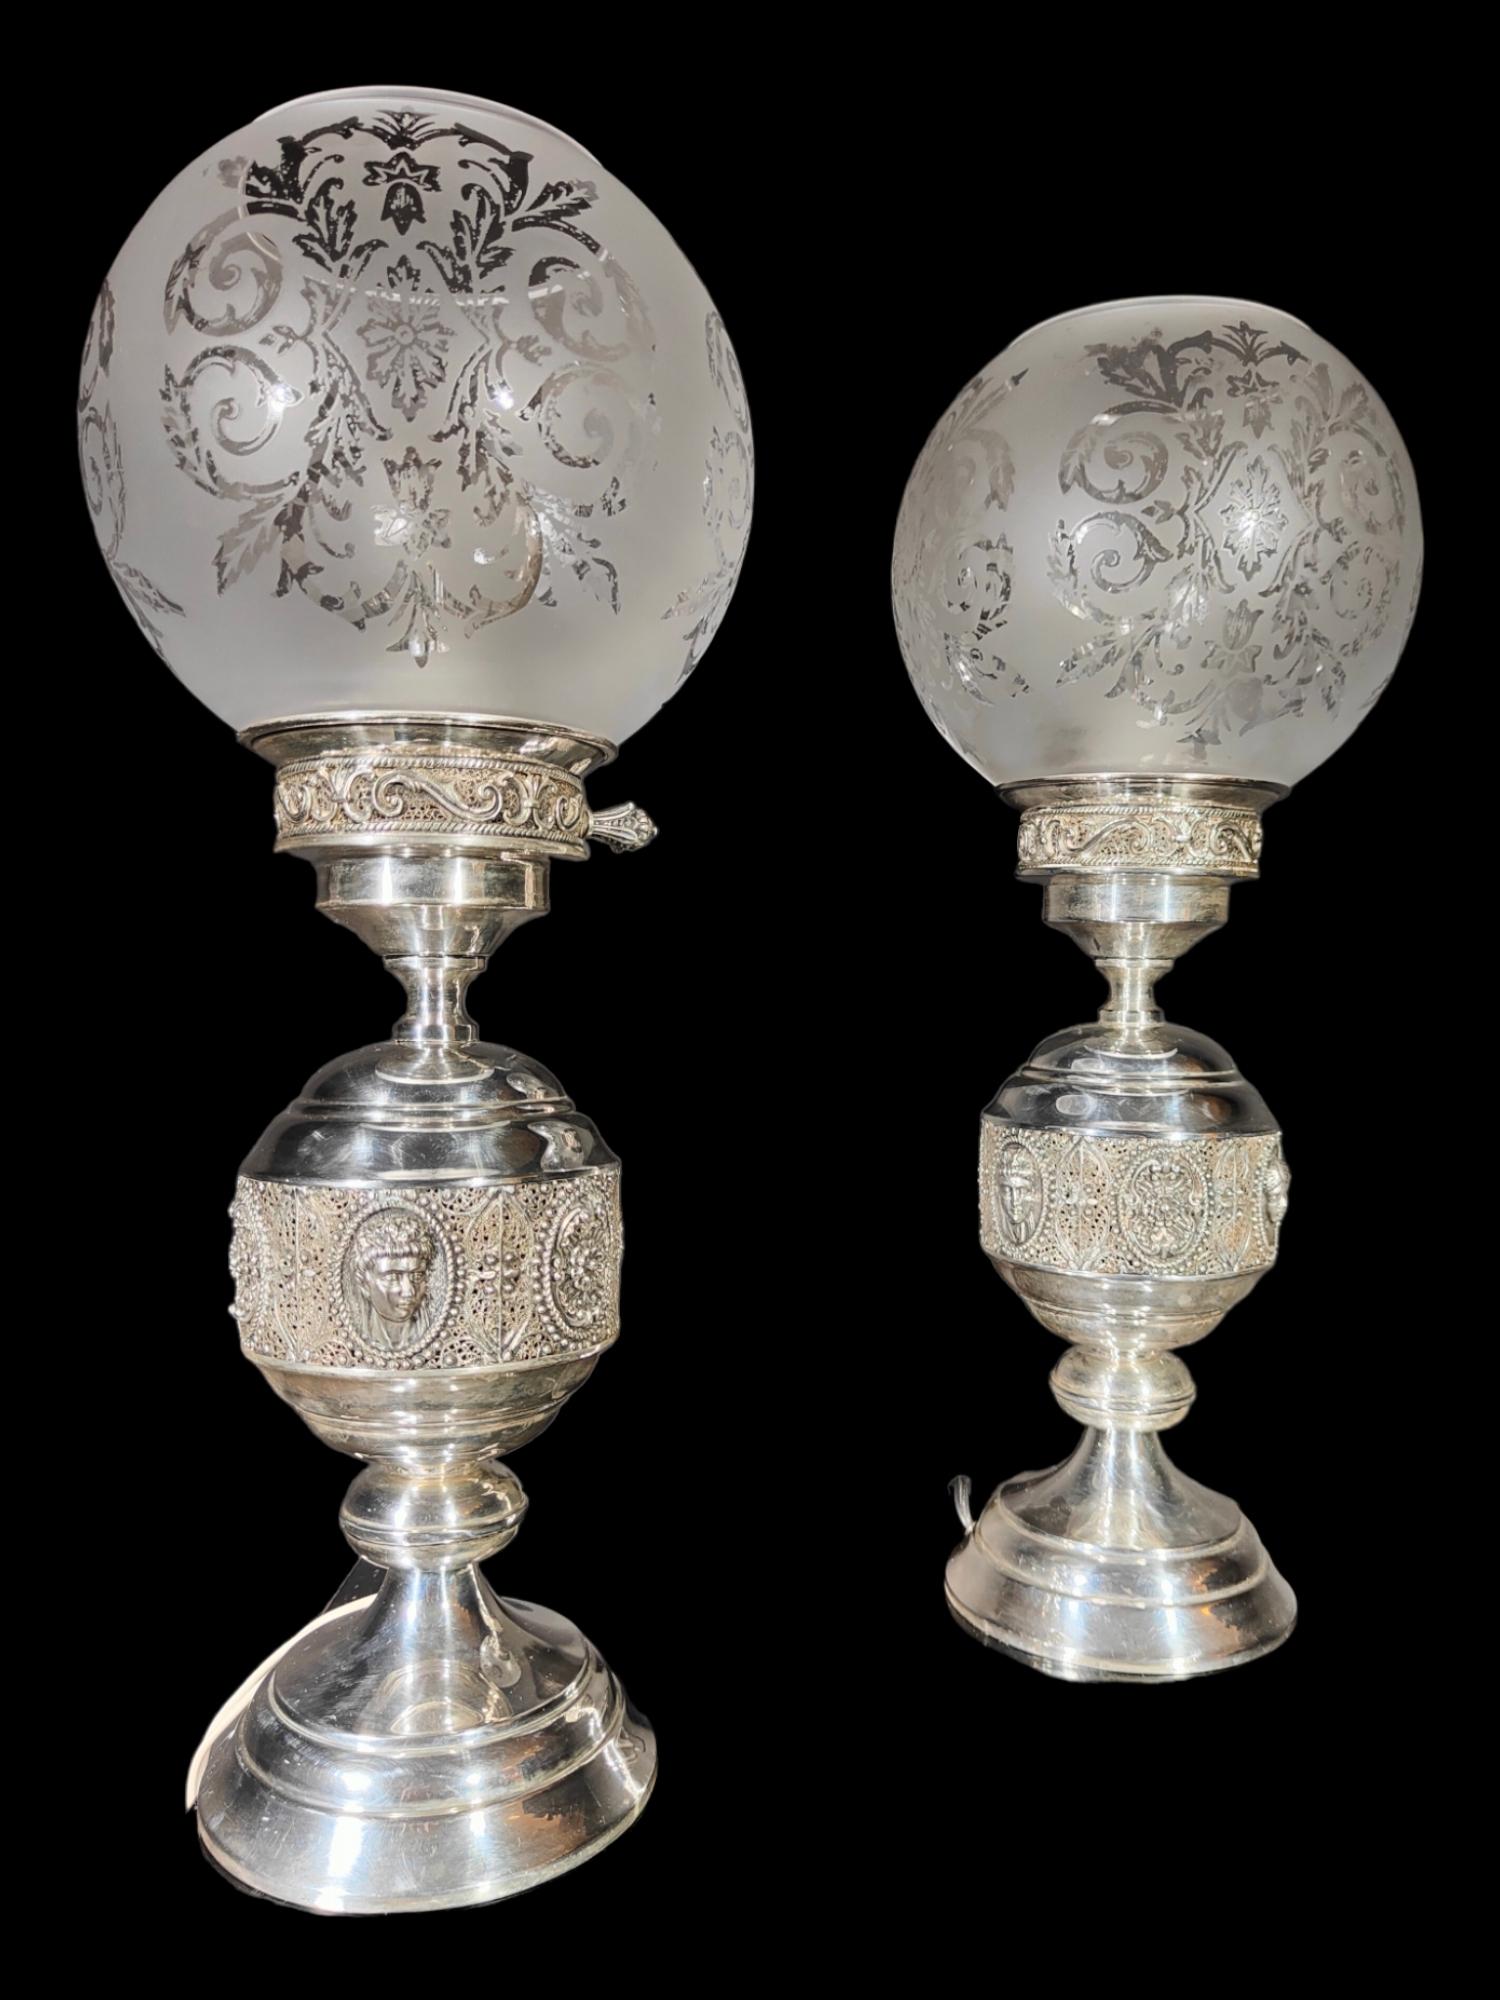 Pair of Lamps in Sterling Silver with Filigree For Sale 3